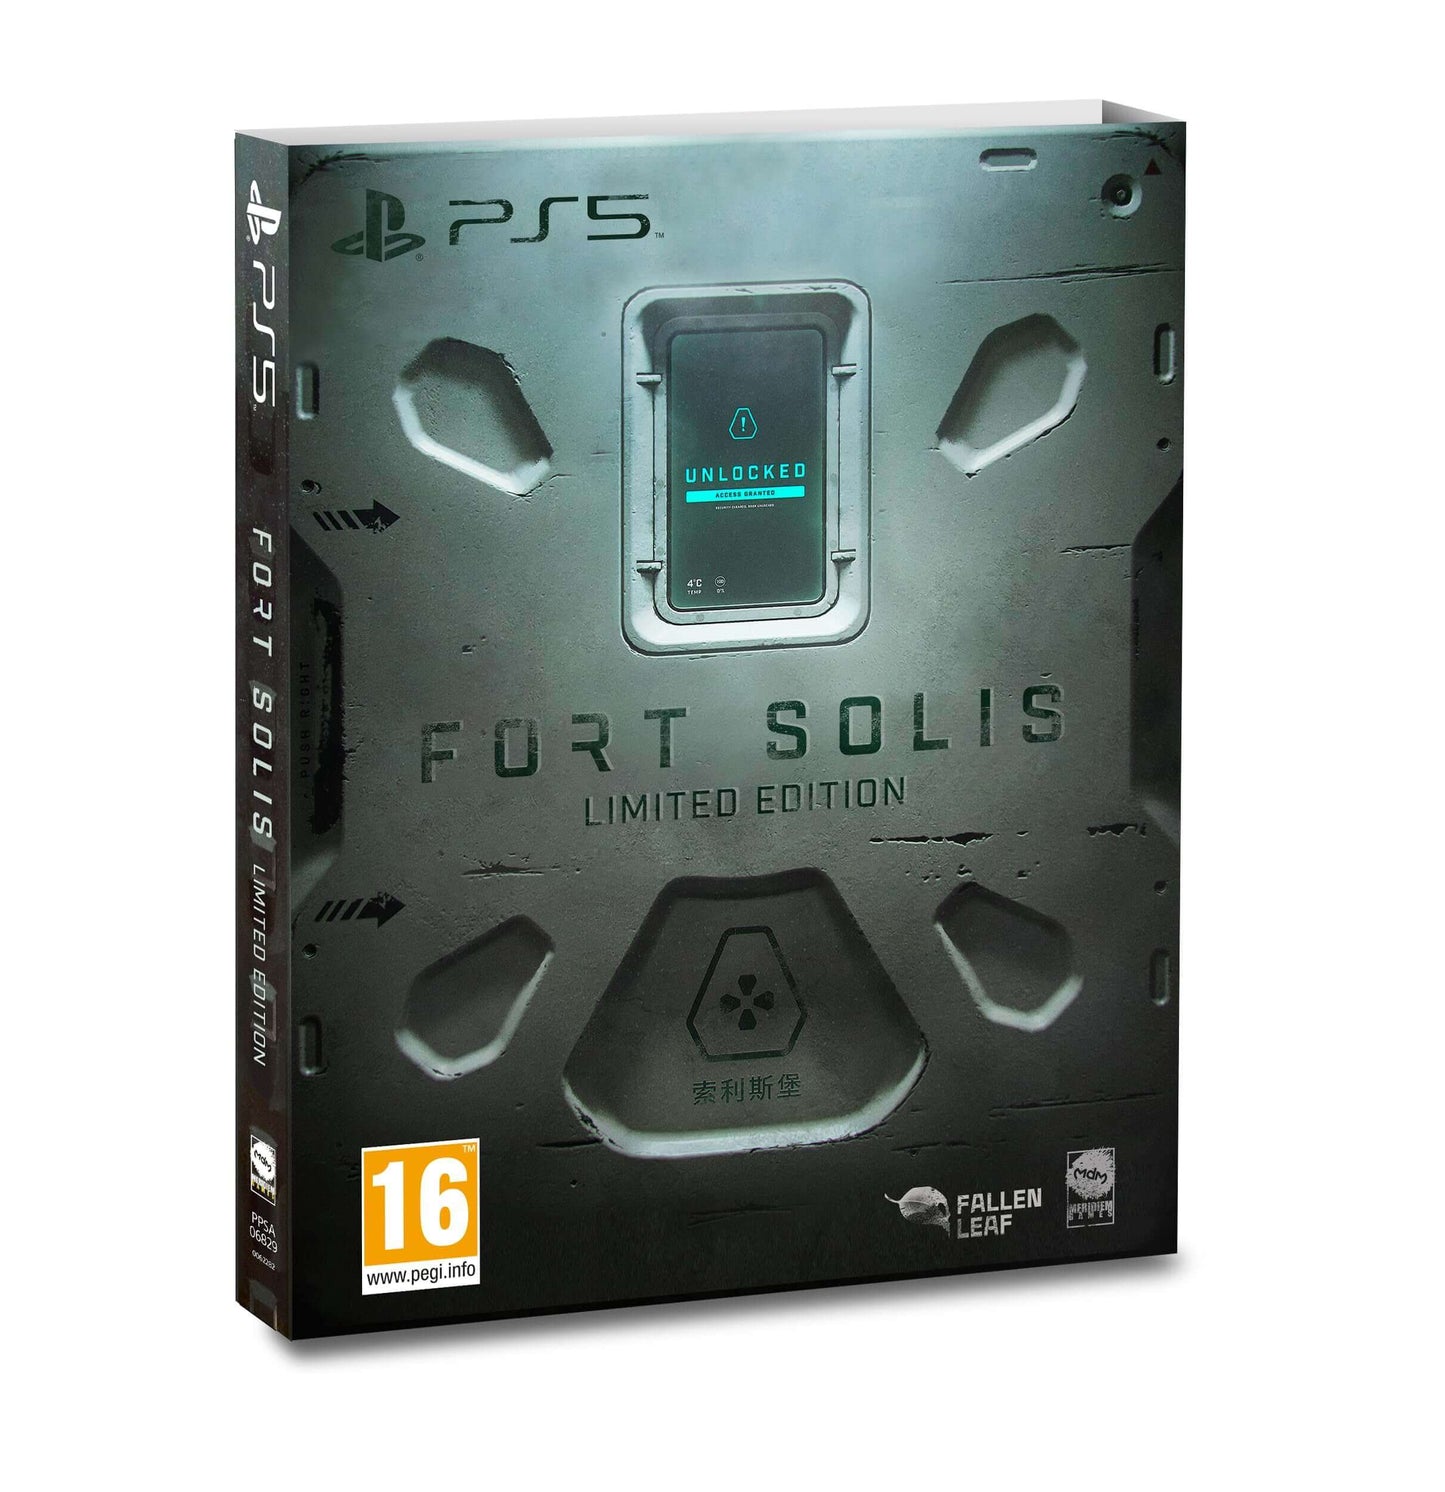 Fort Solis Limited Edition PS5 £19.99